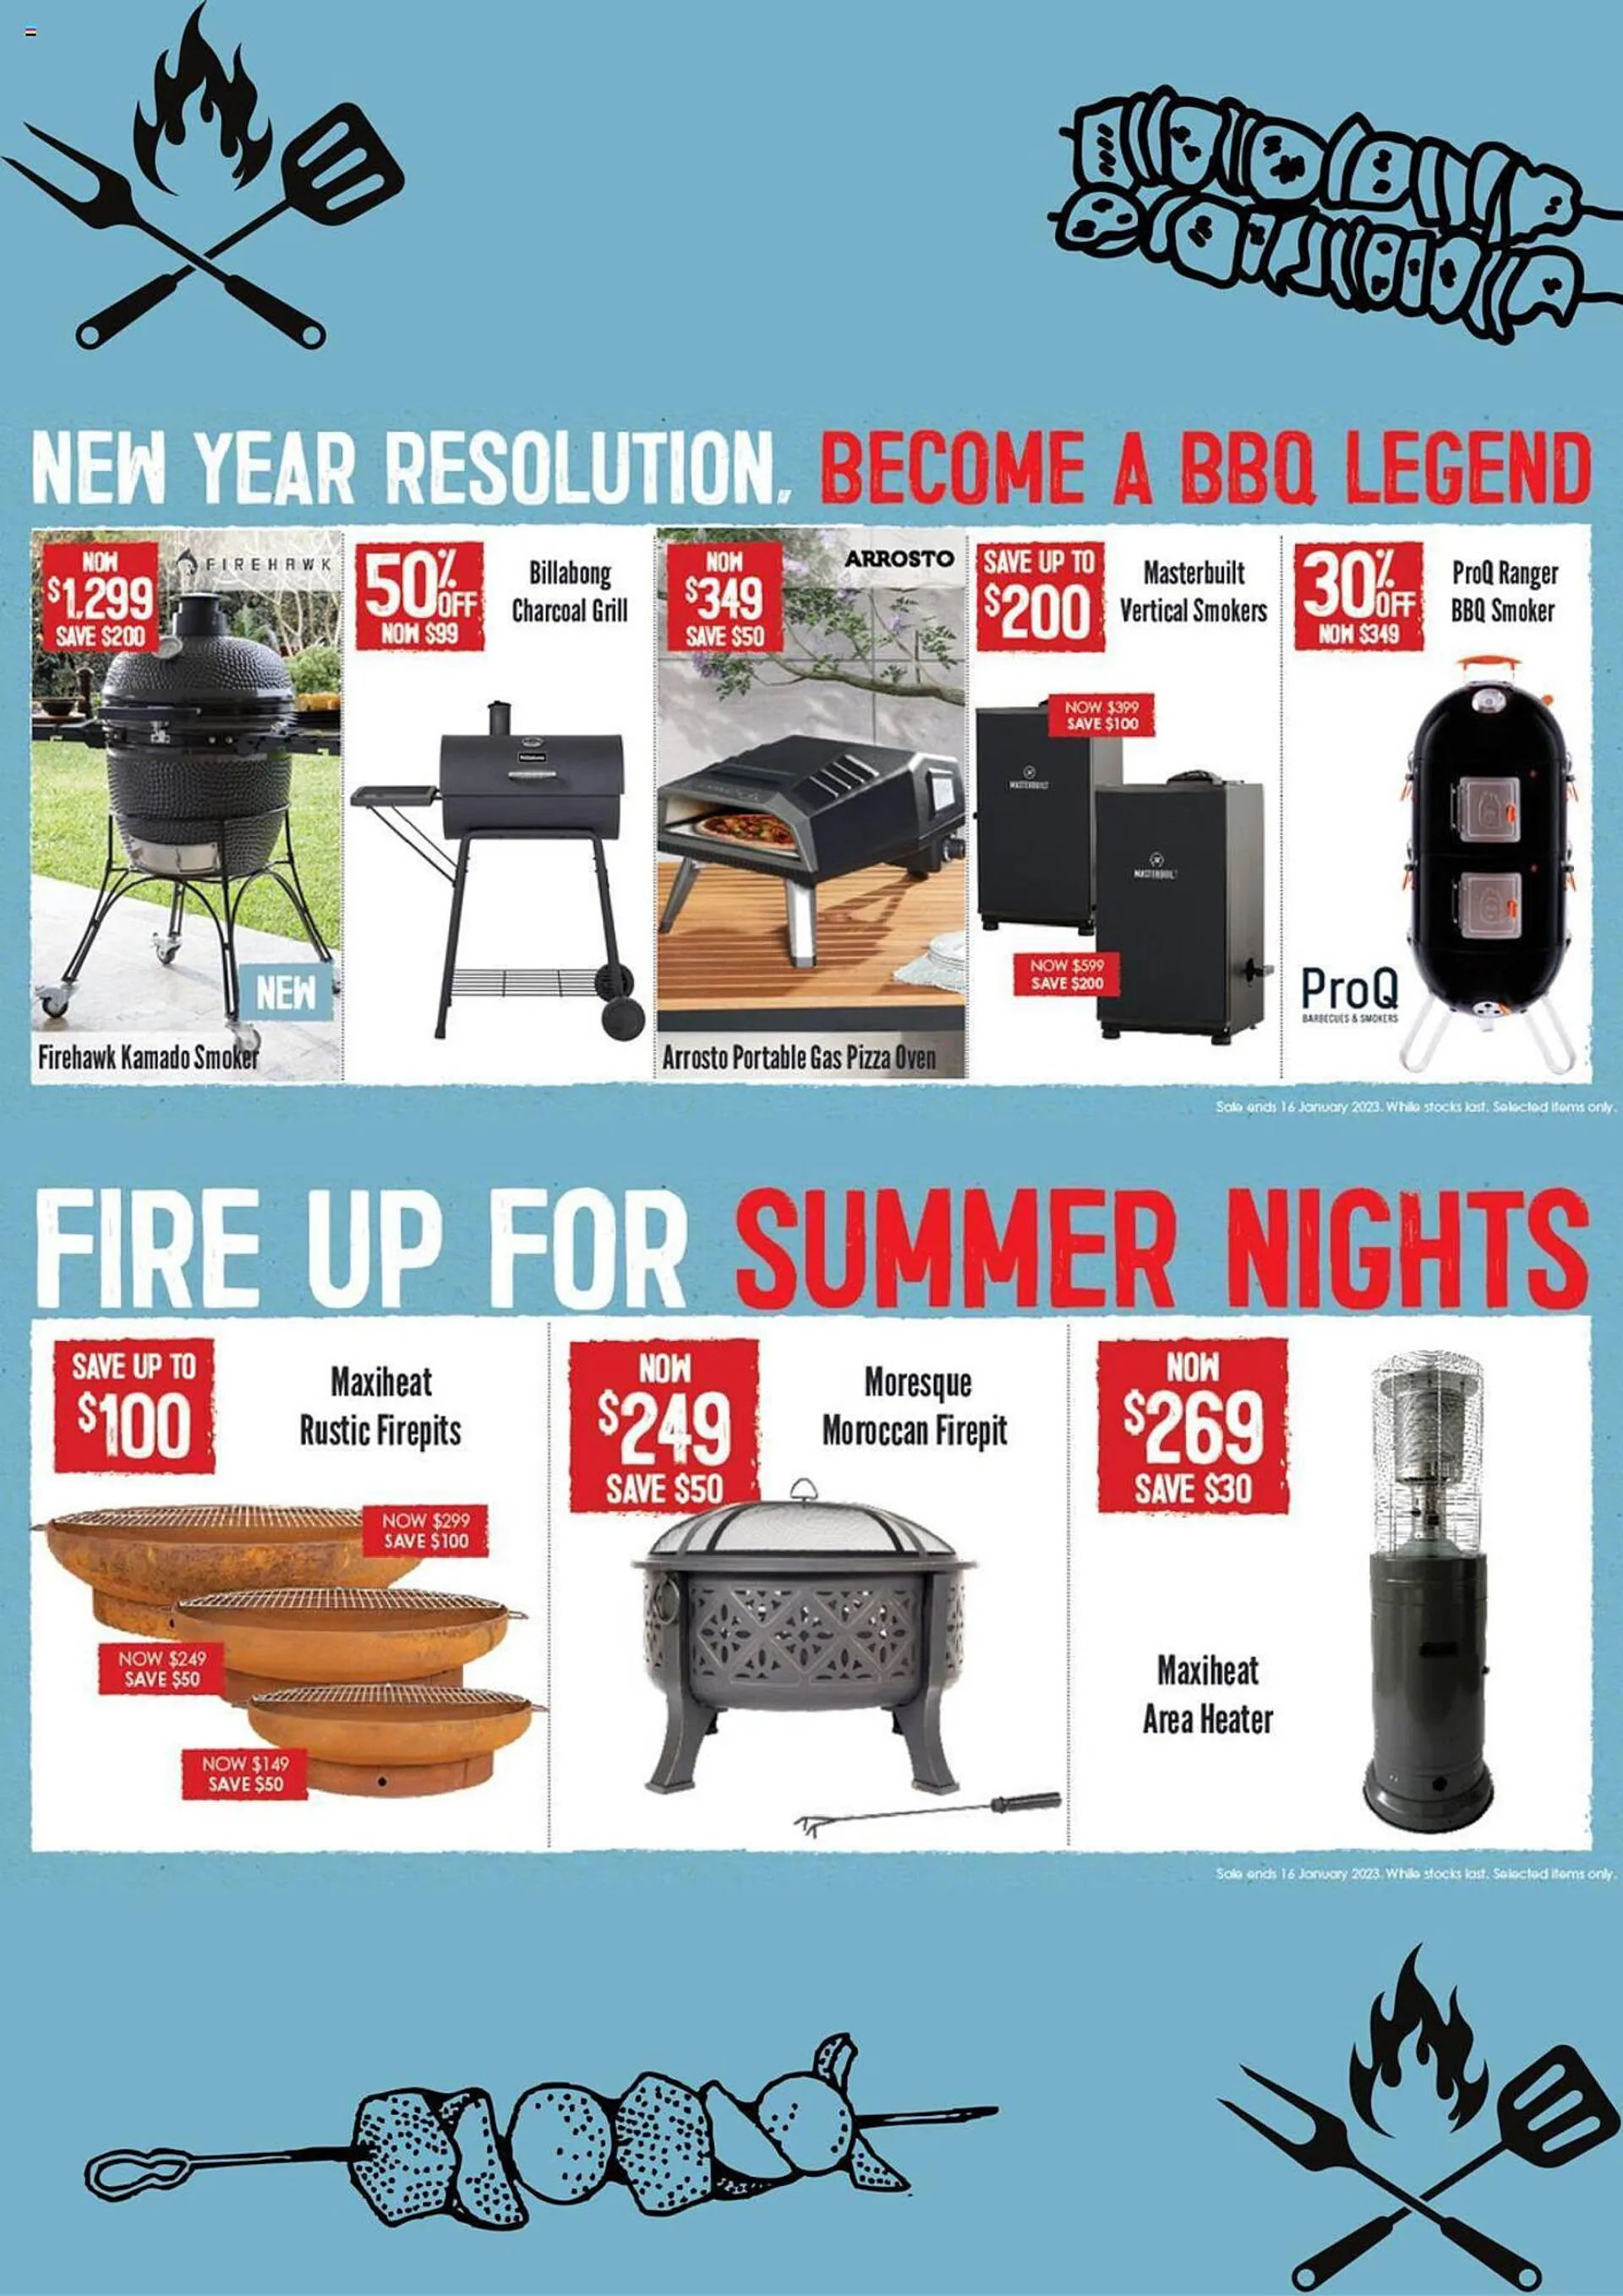 Barbeques Galore Catalogue - 2